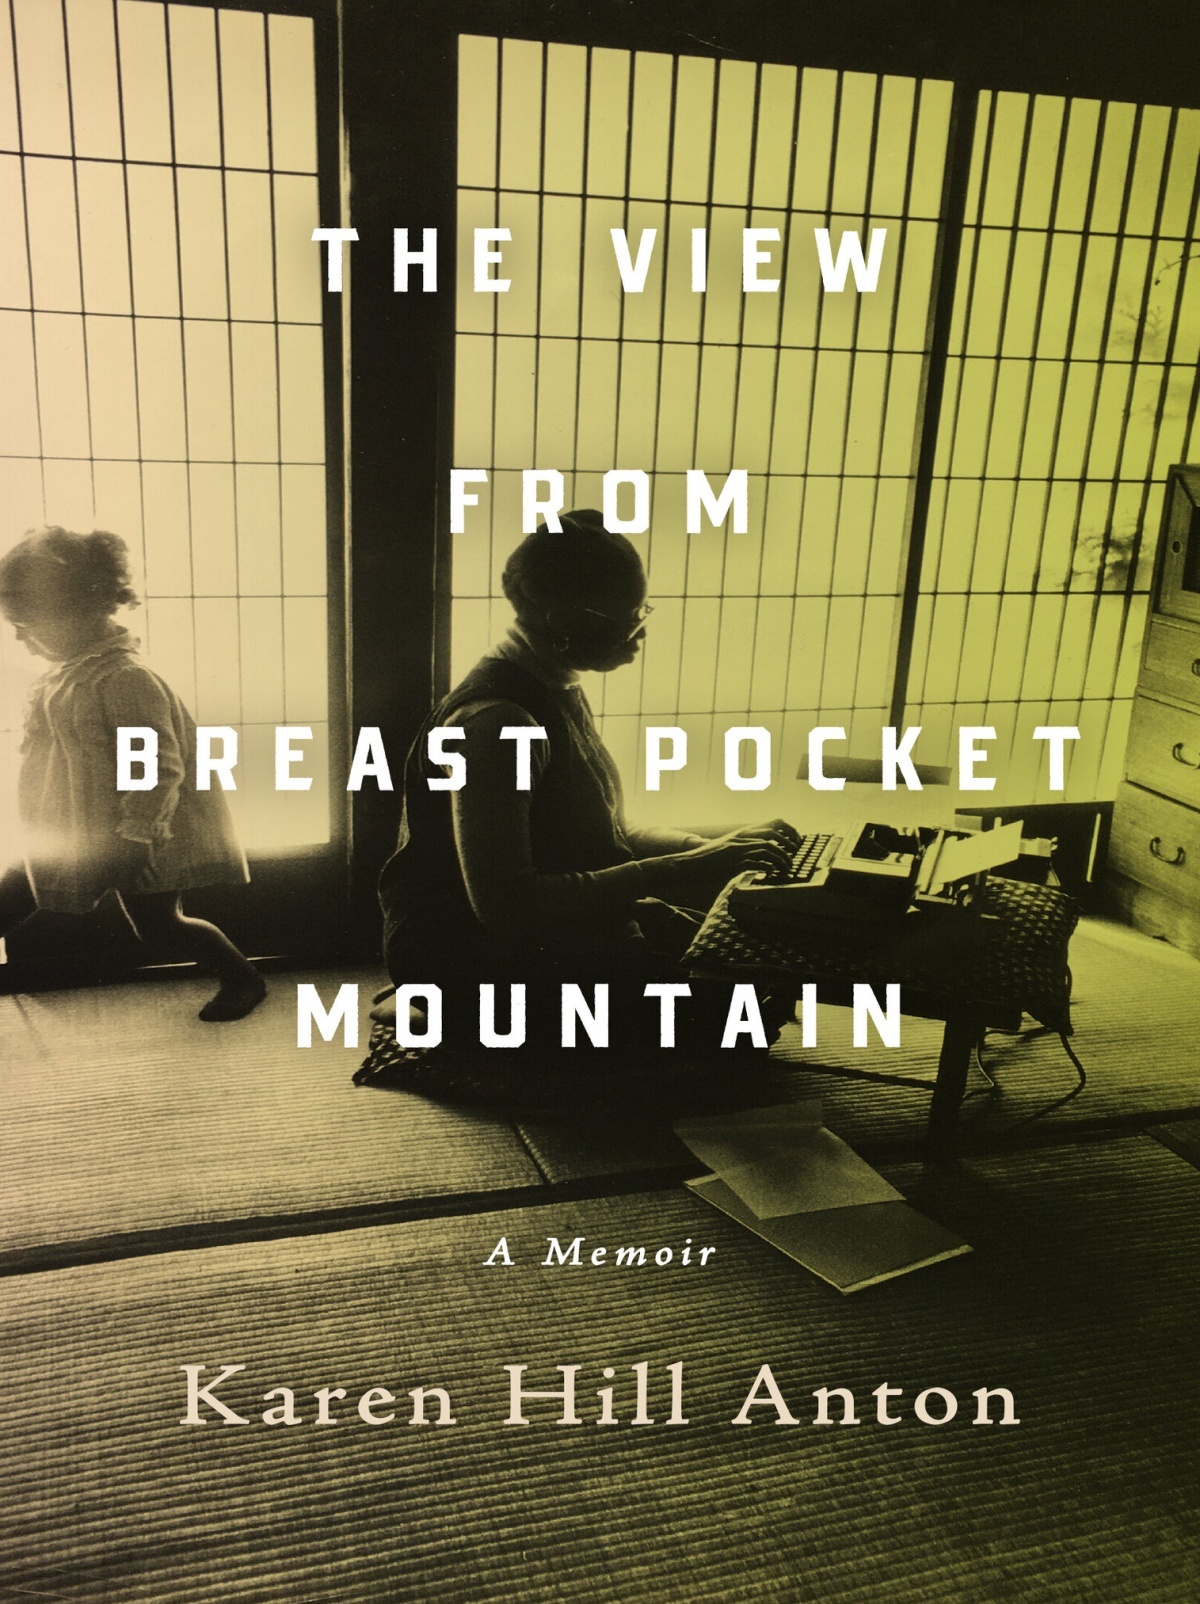 "The View from Breast Pocket Mountain: A Memoir," by Karen Hill Anton